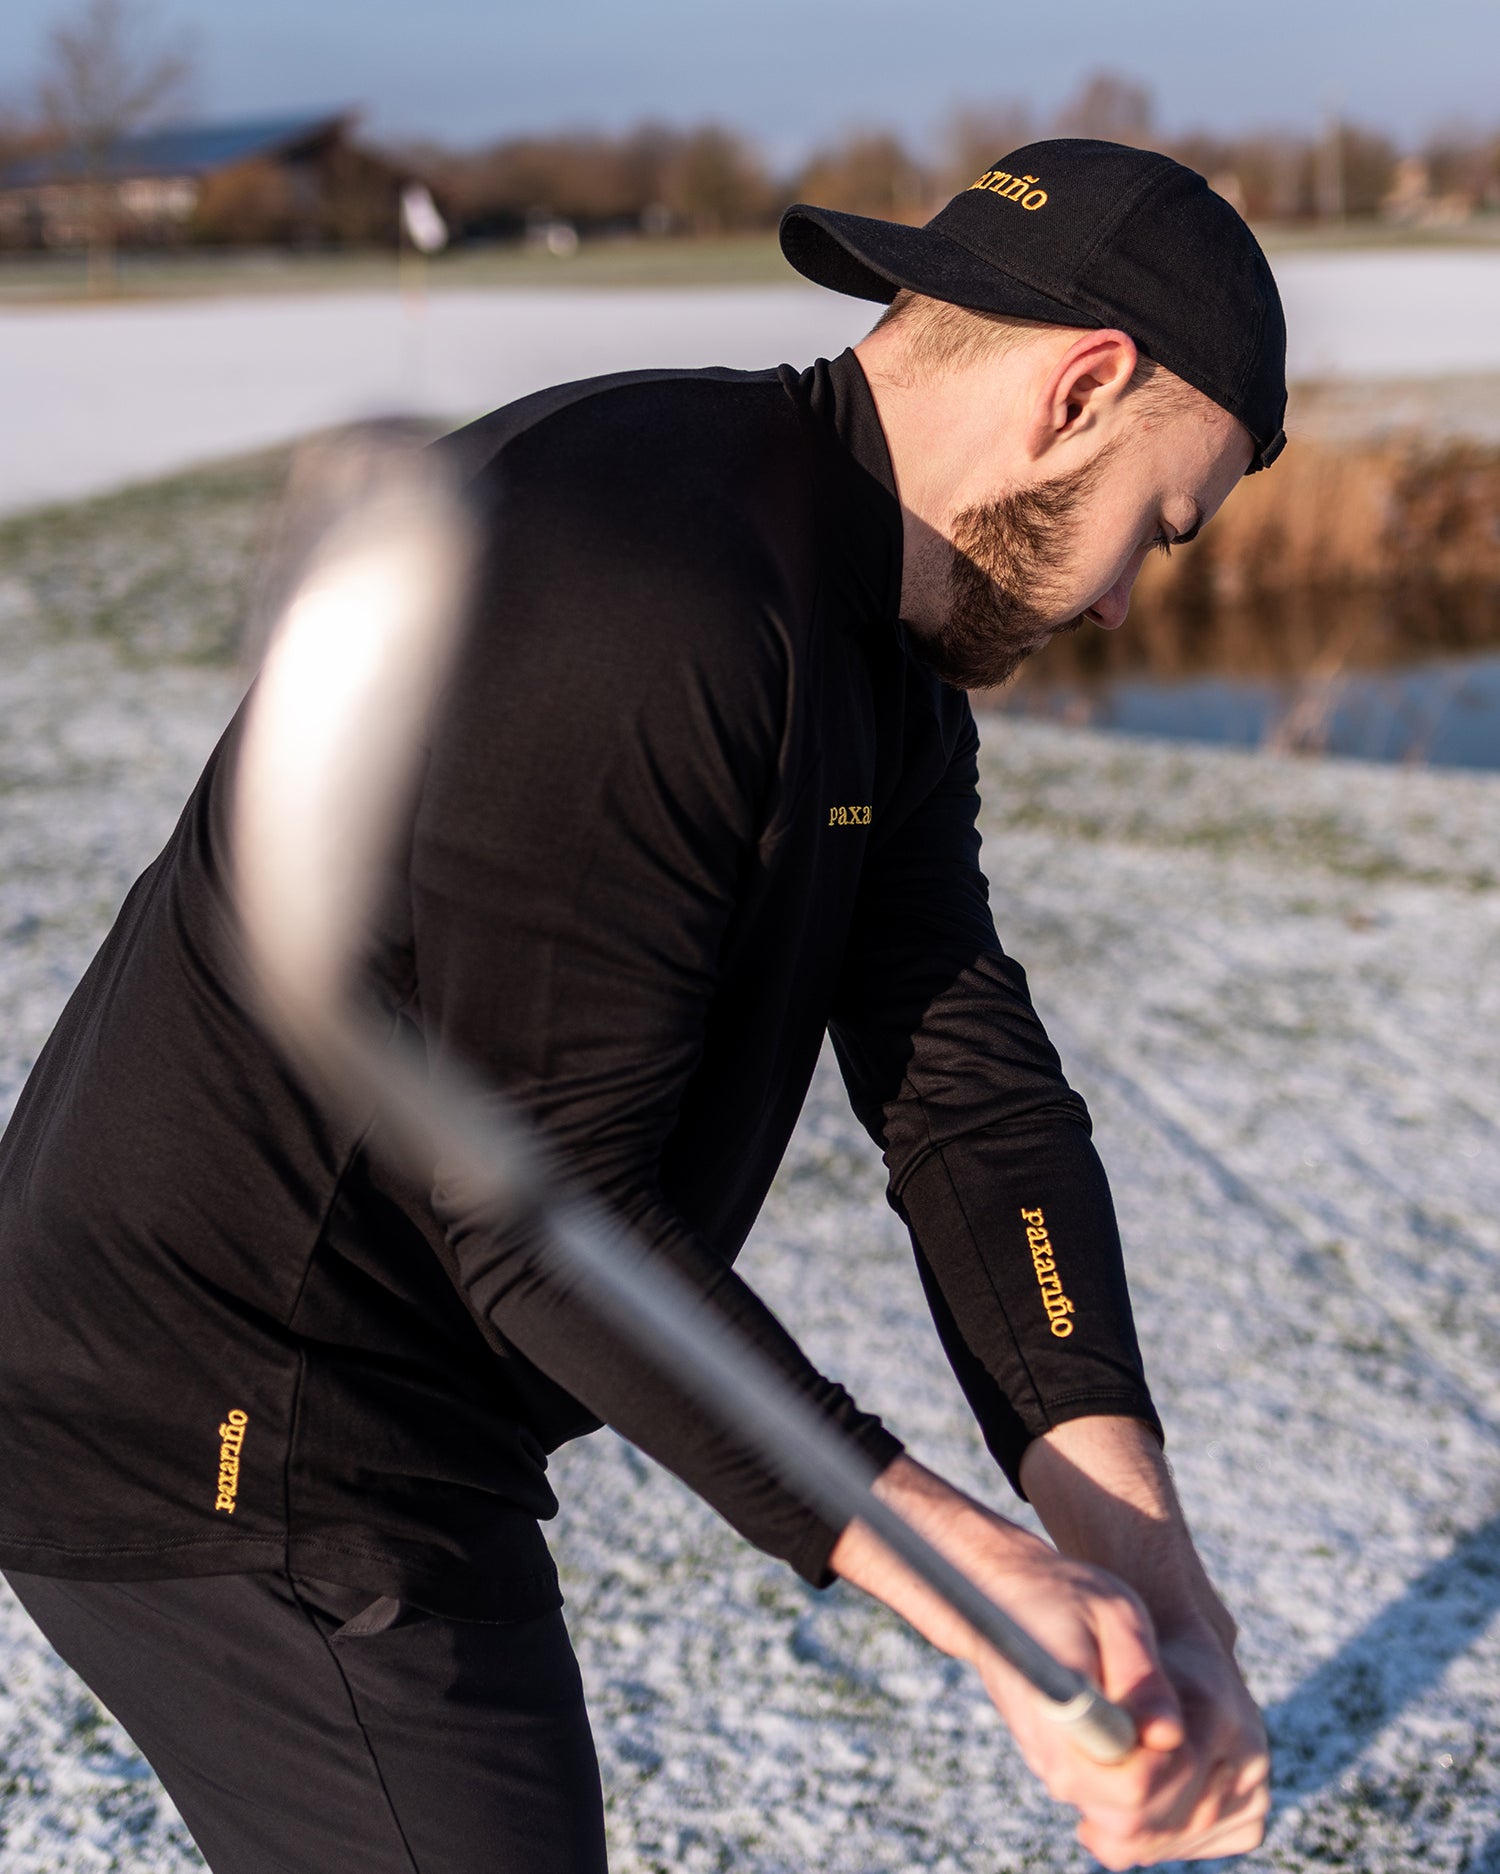 Co-Founder Sebastian take a swing on a snowy golfcours, while staying warm wearing the TENCEL™ Longsleeve by paxariño.